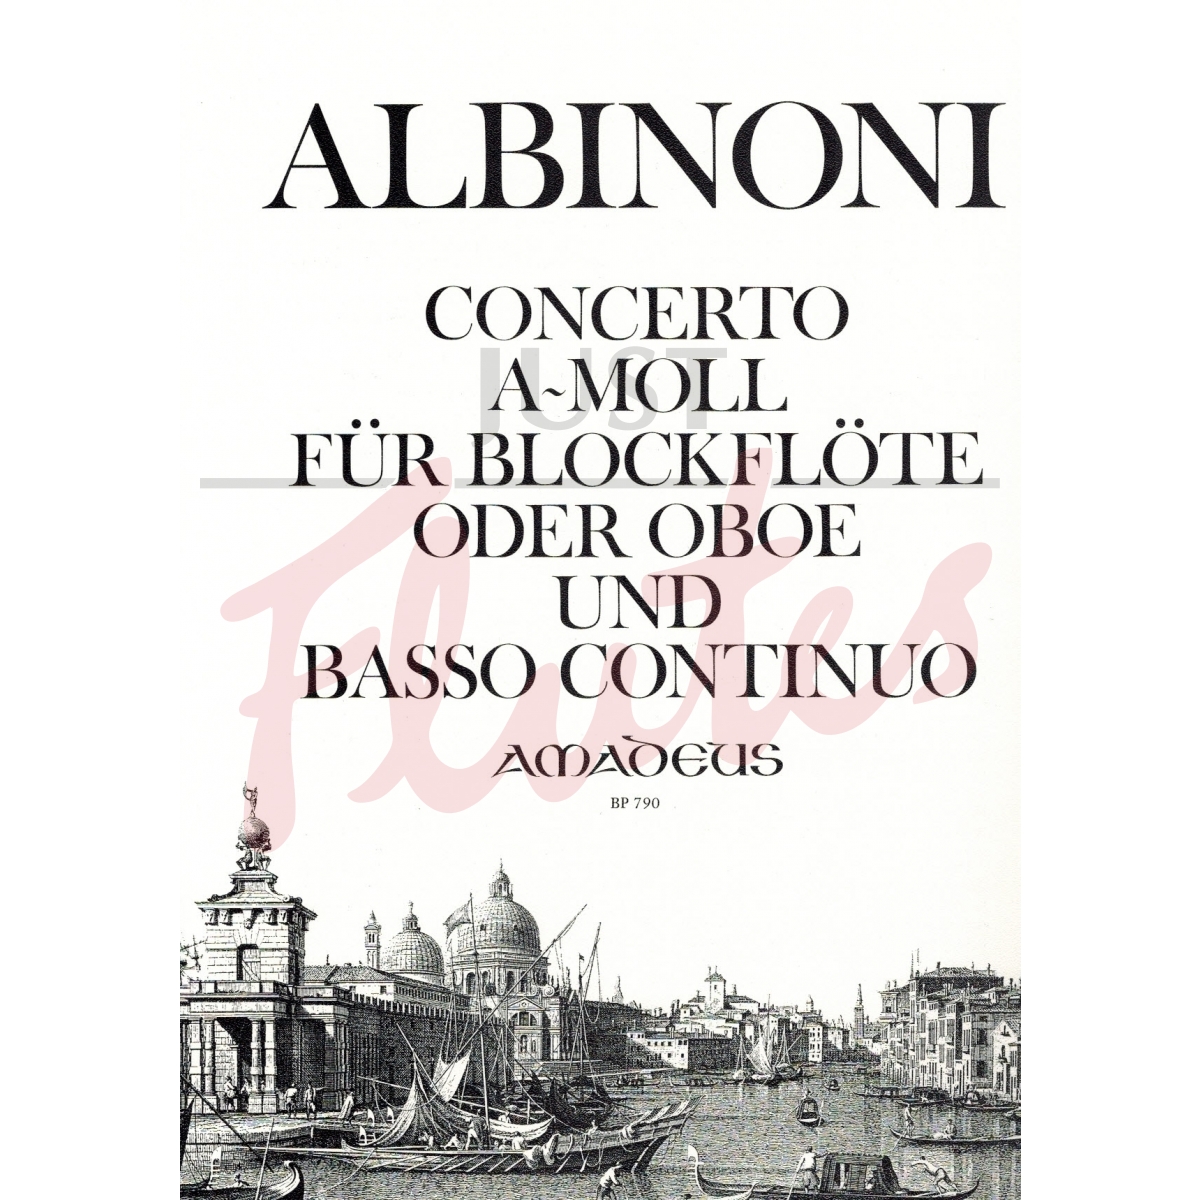 Concerto in A minor for Flute or Recorder and Continuo